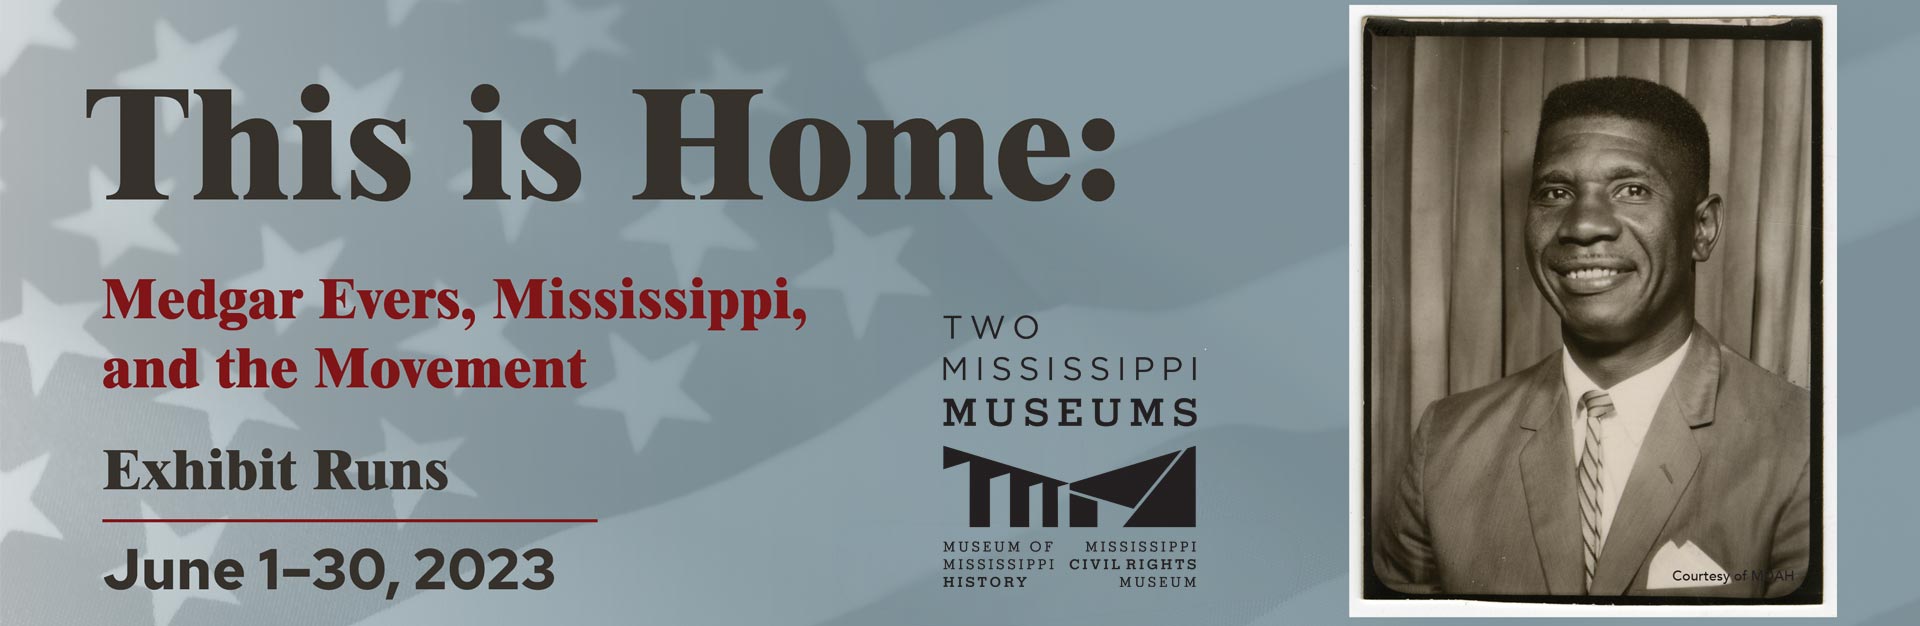 This is Home: Medgar Evers, Mississippi, and the Movement